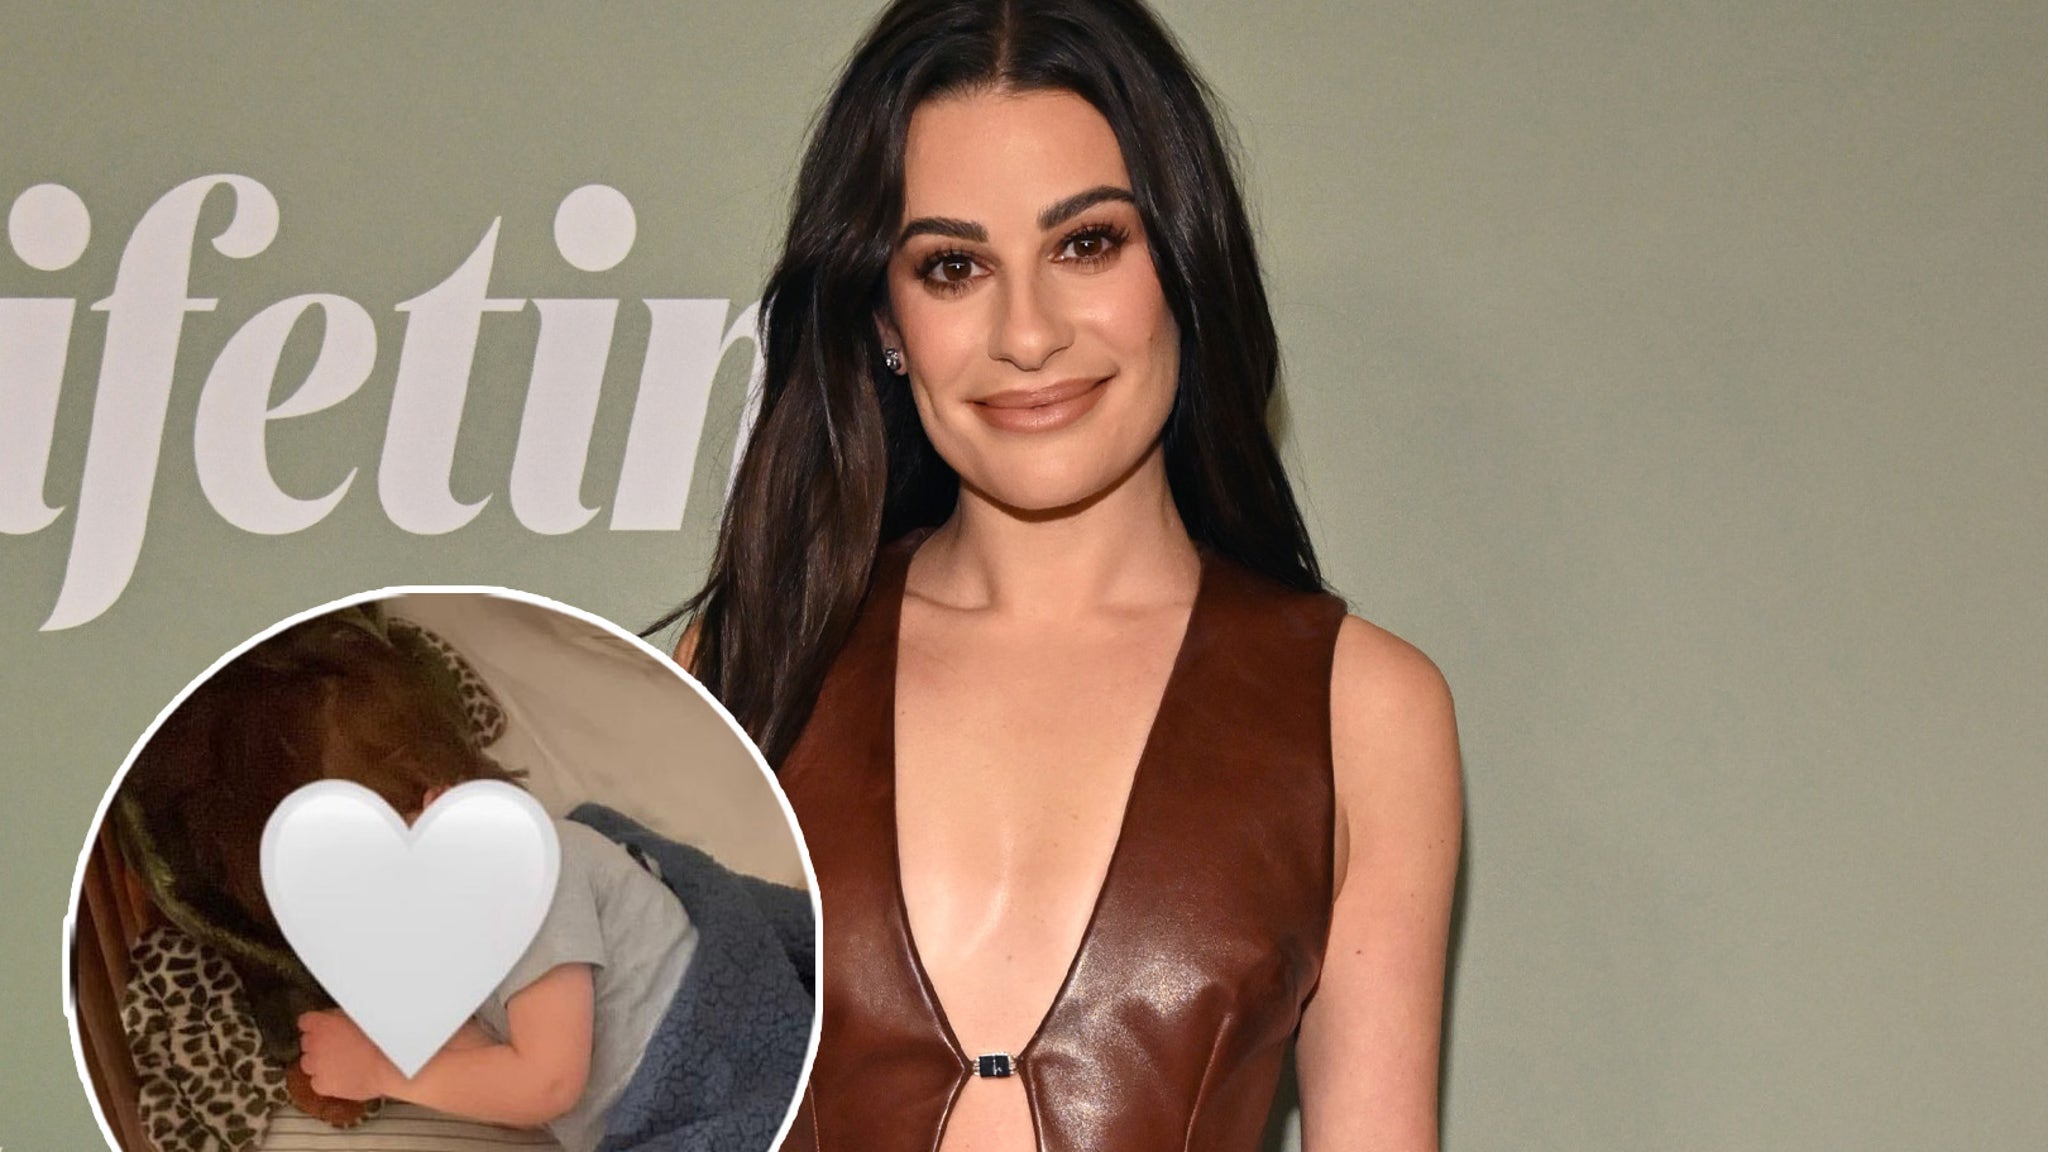 Lea Michele Reveals Son Hospitalized For Second Time in Emotional Instagram Post